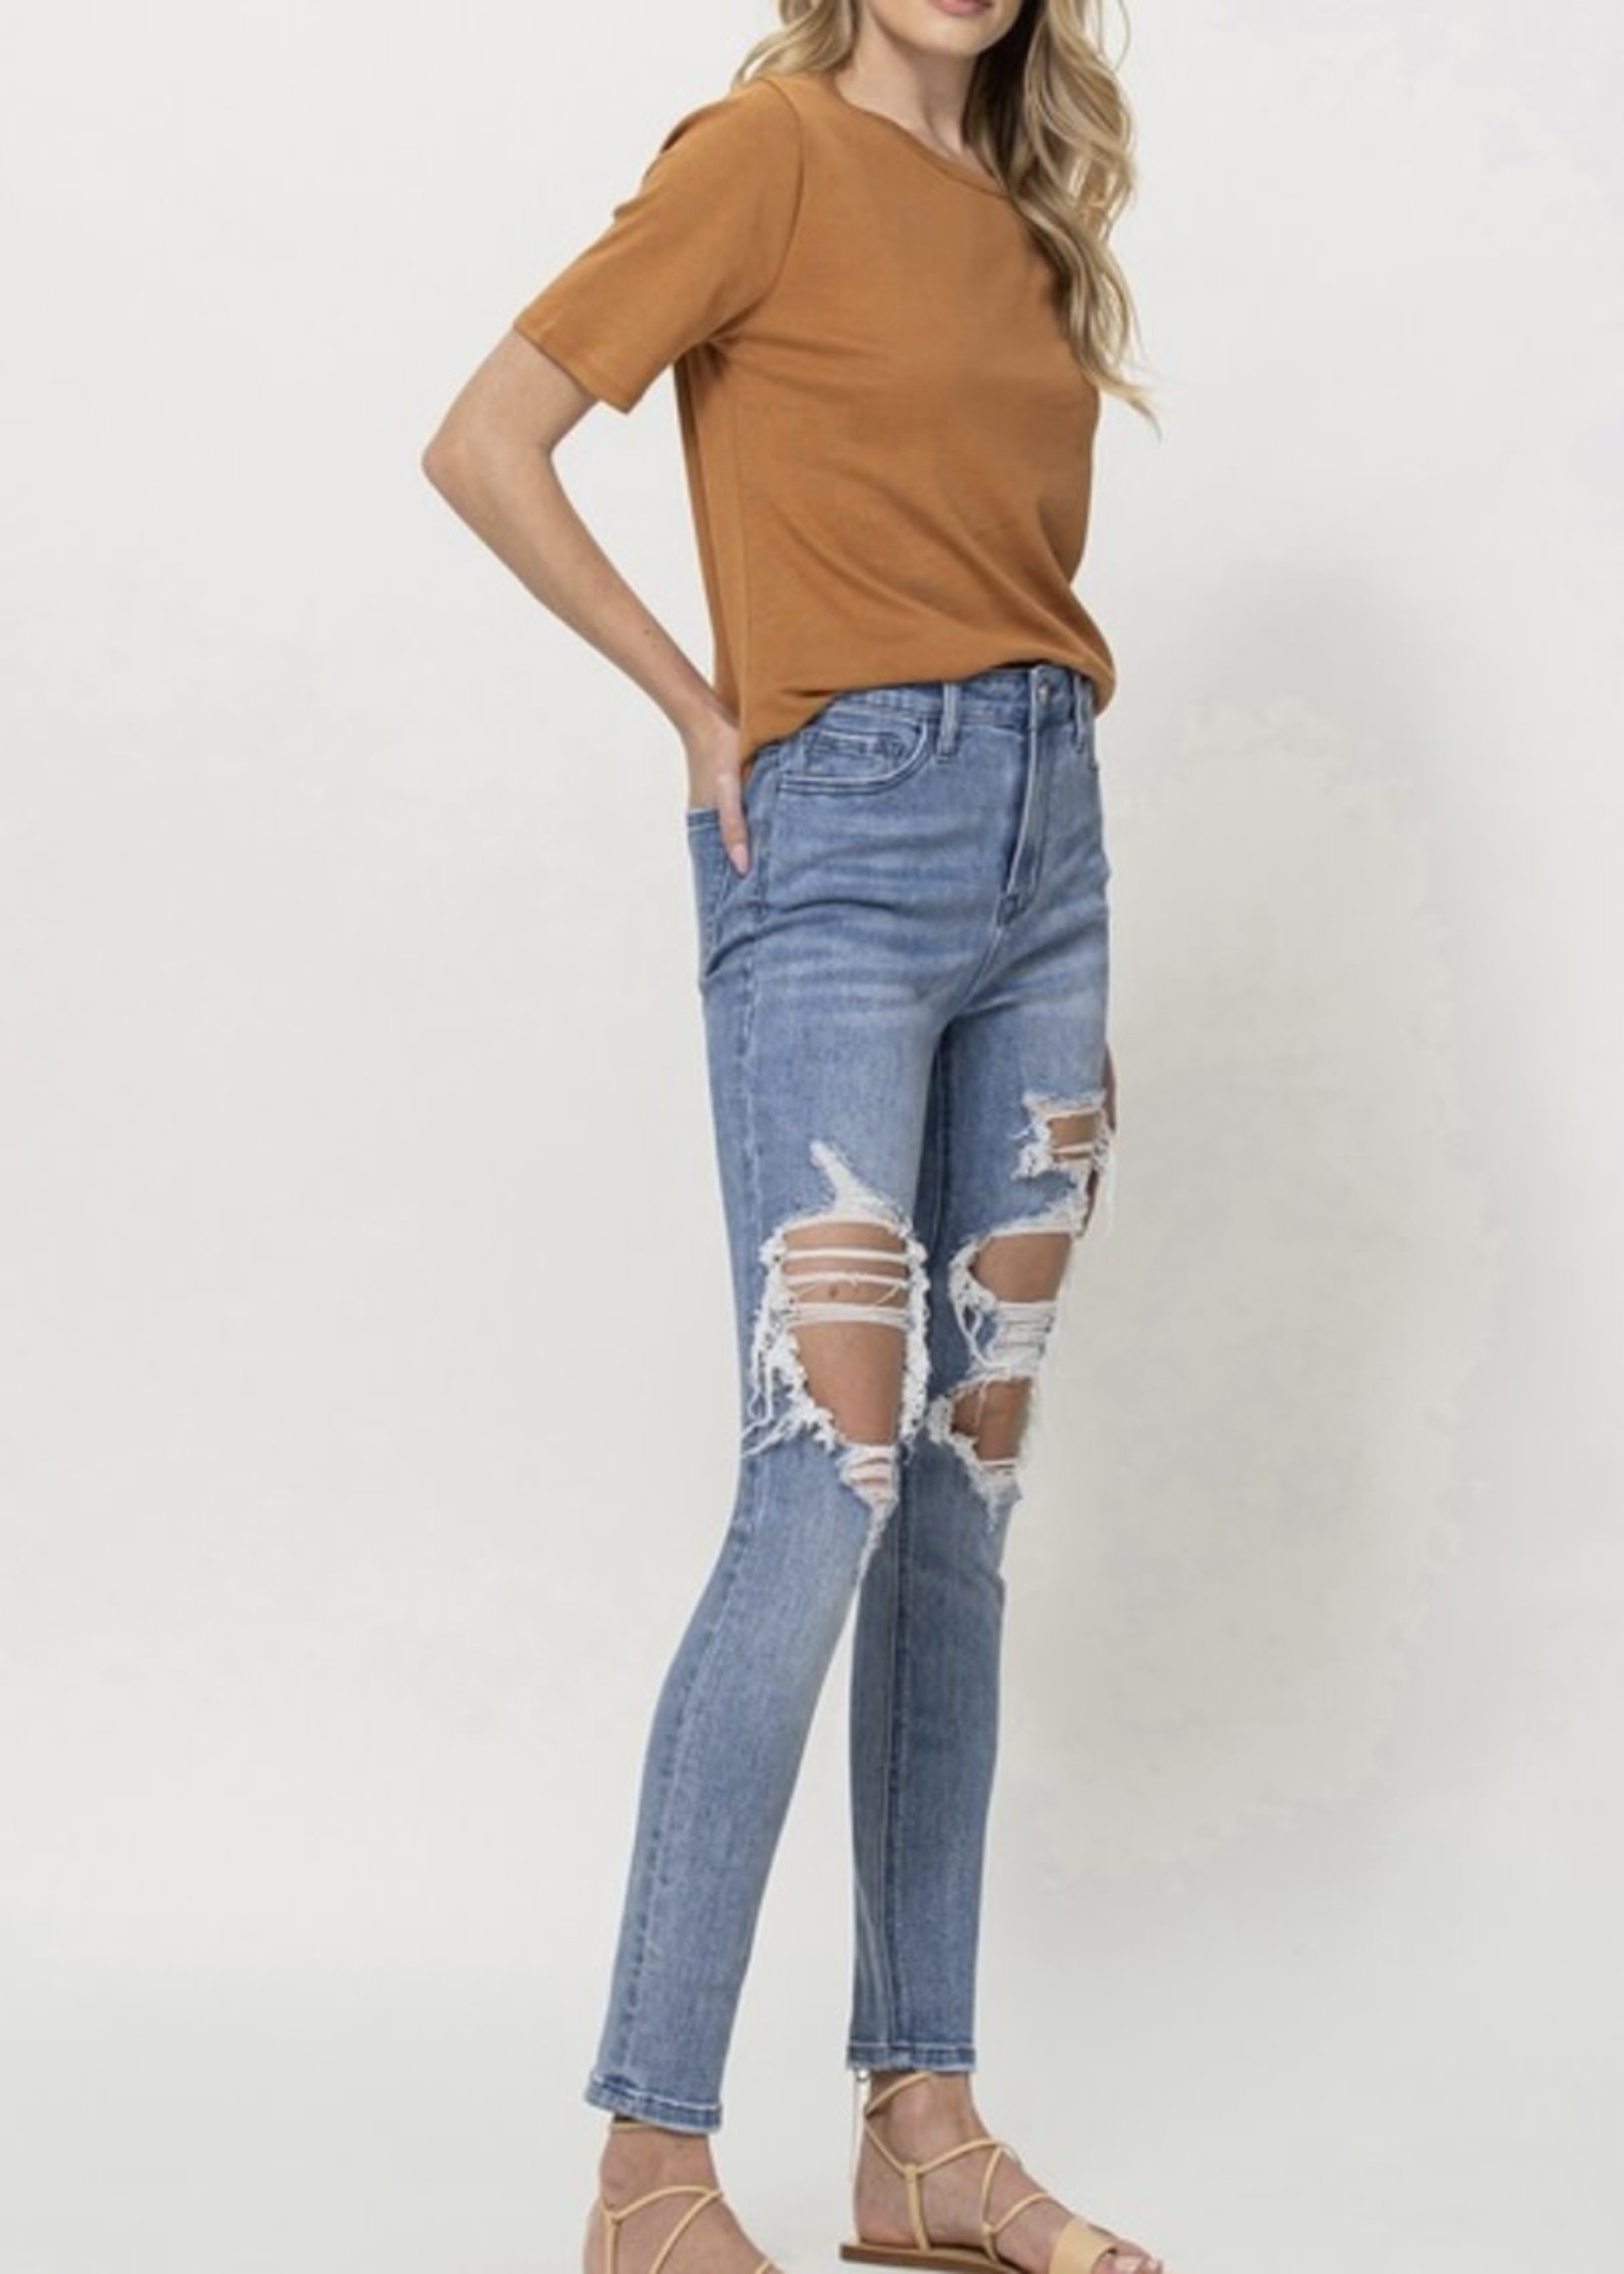 Camden Distressed Skinny Jeans